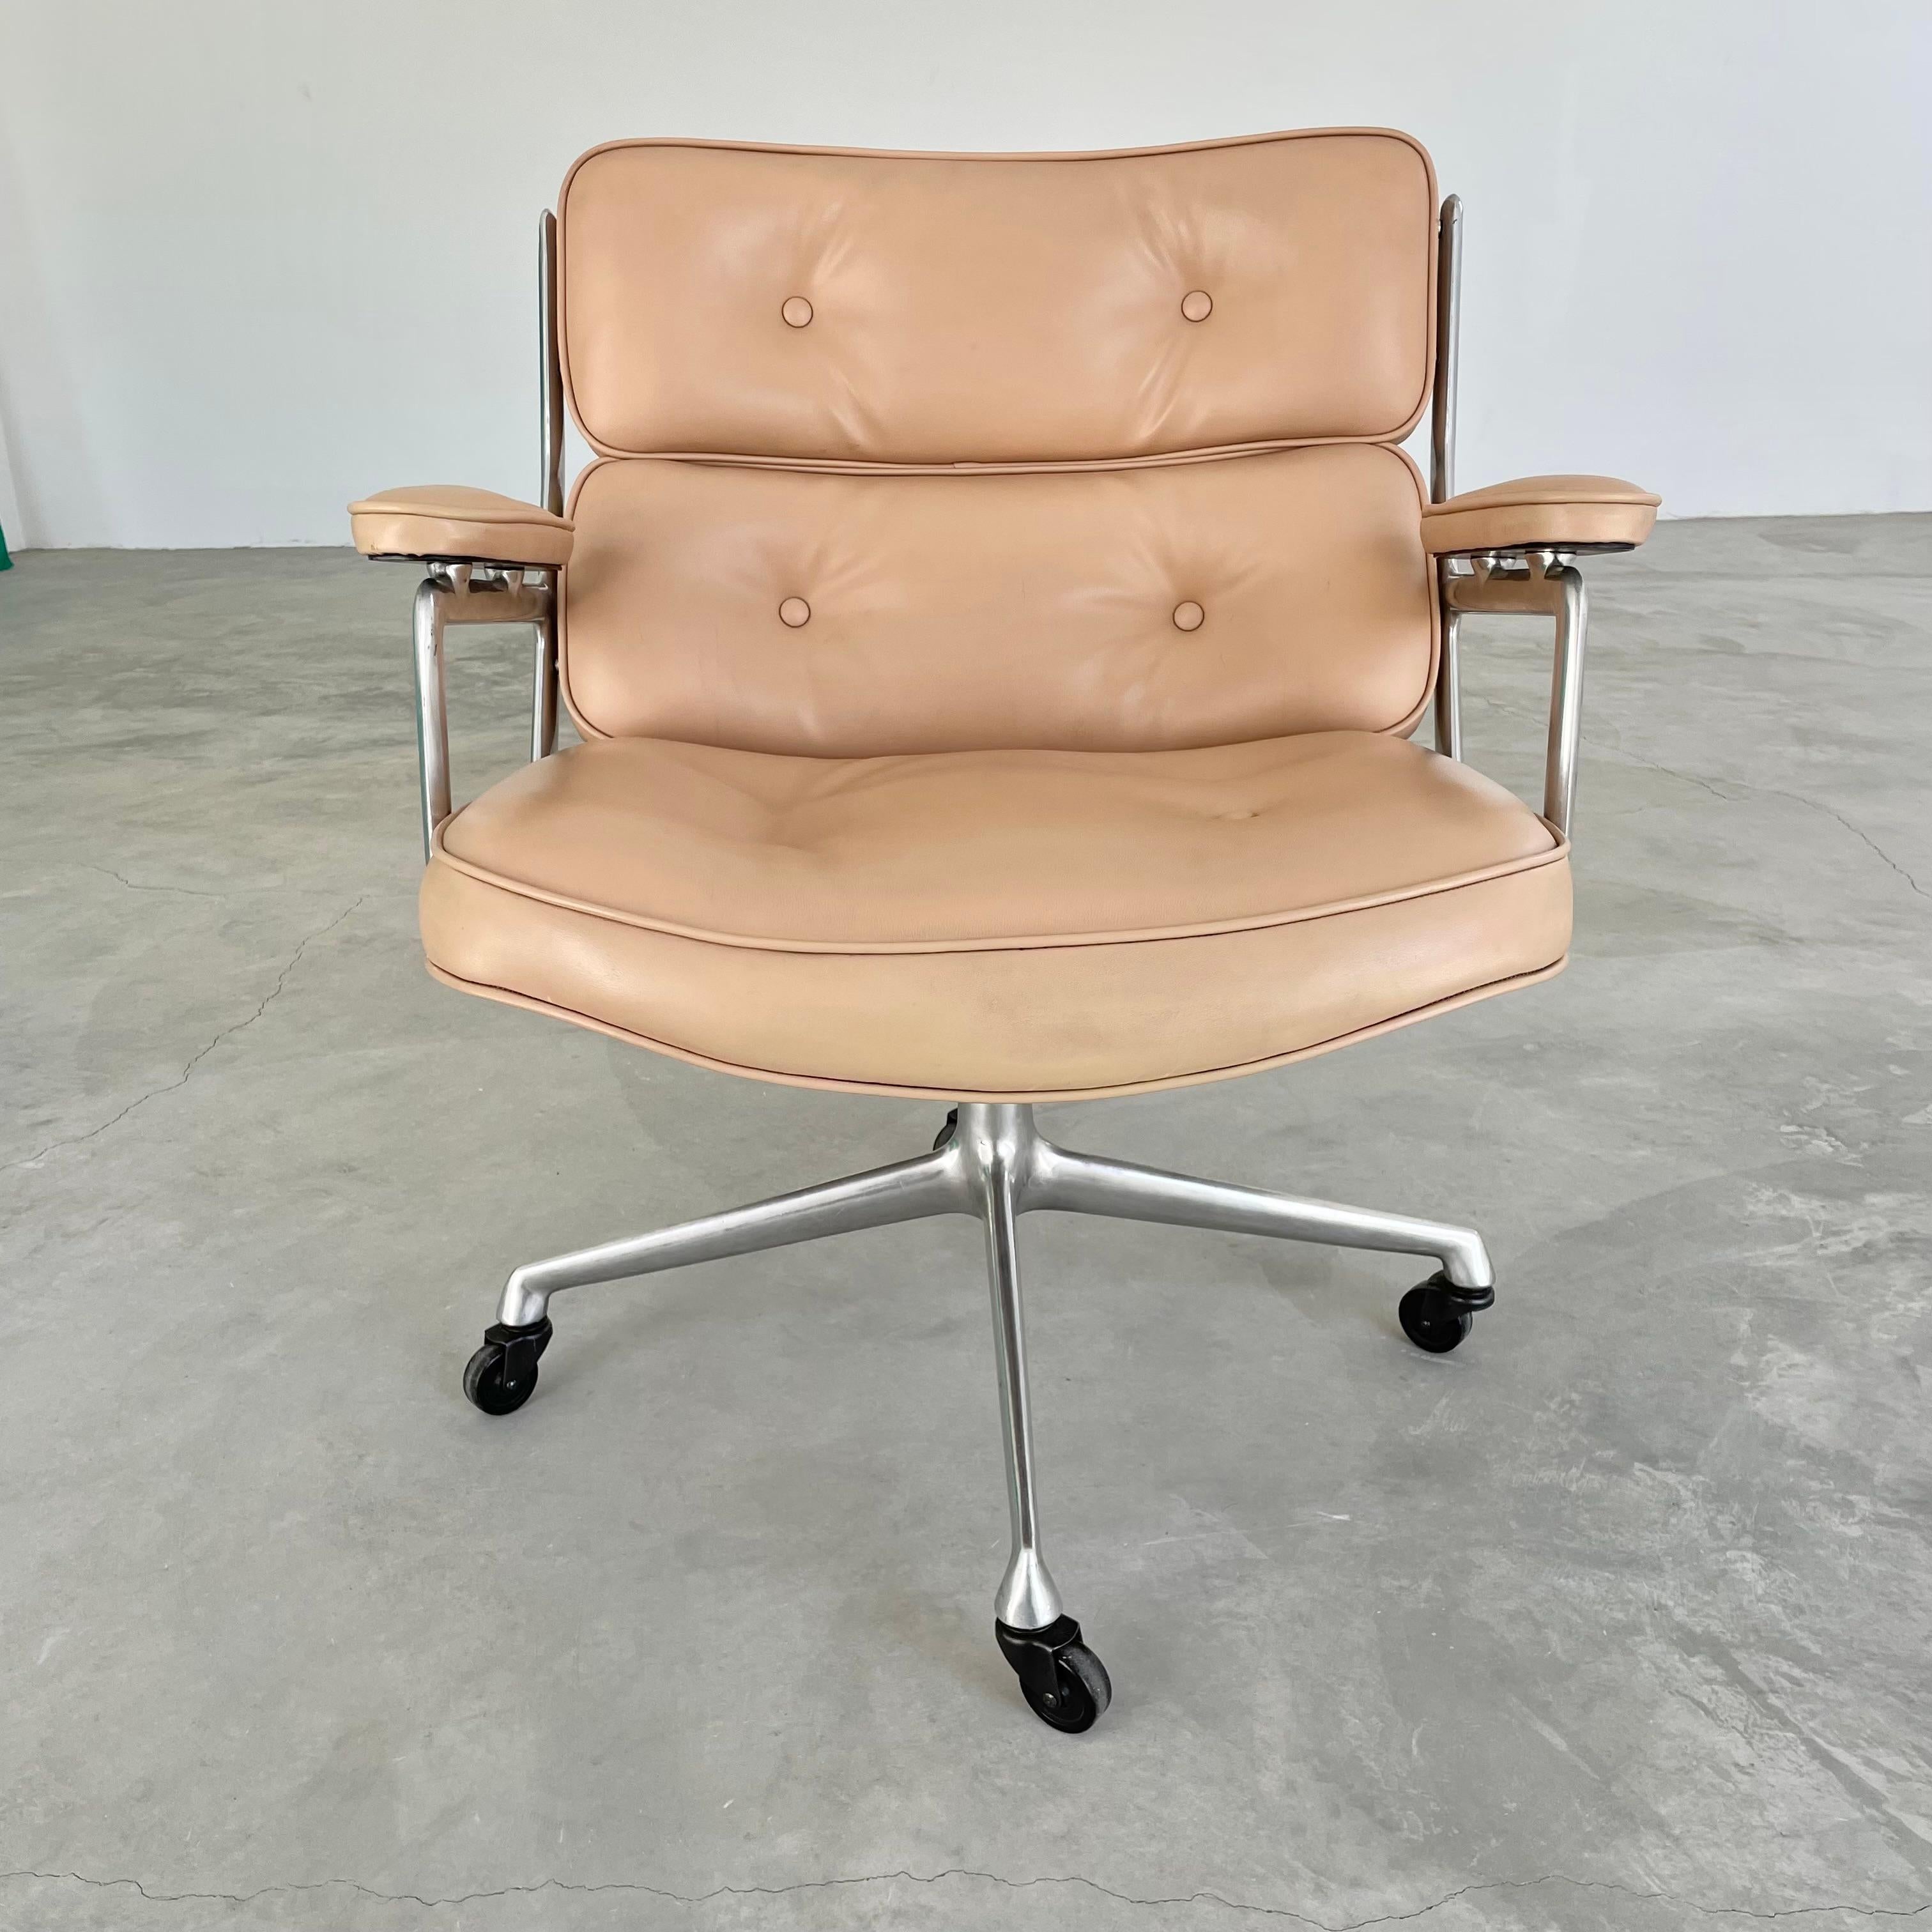 Vintage Eames Time Life Lobby Chair in Camel 8